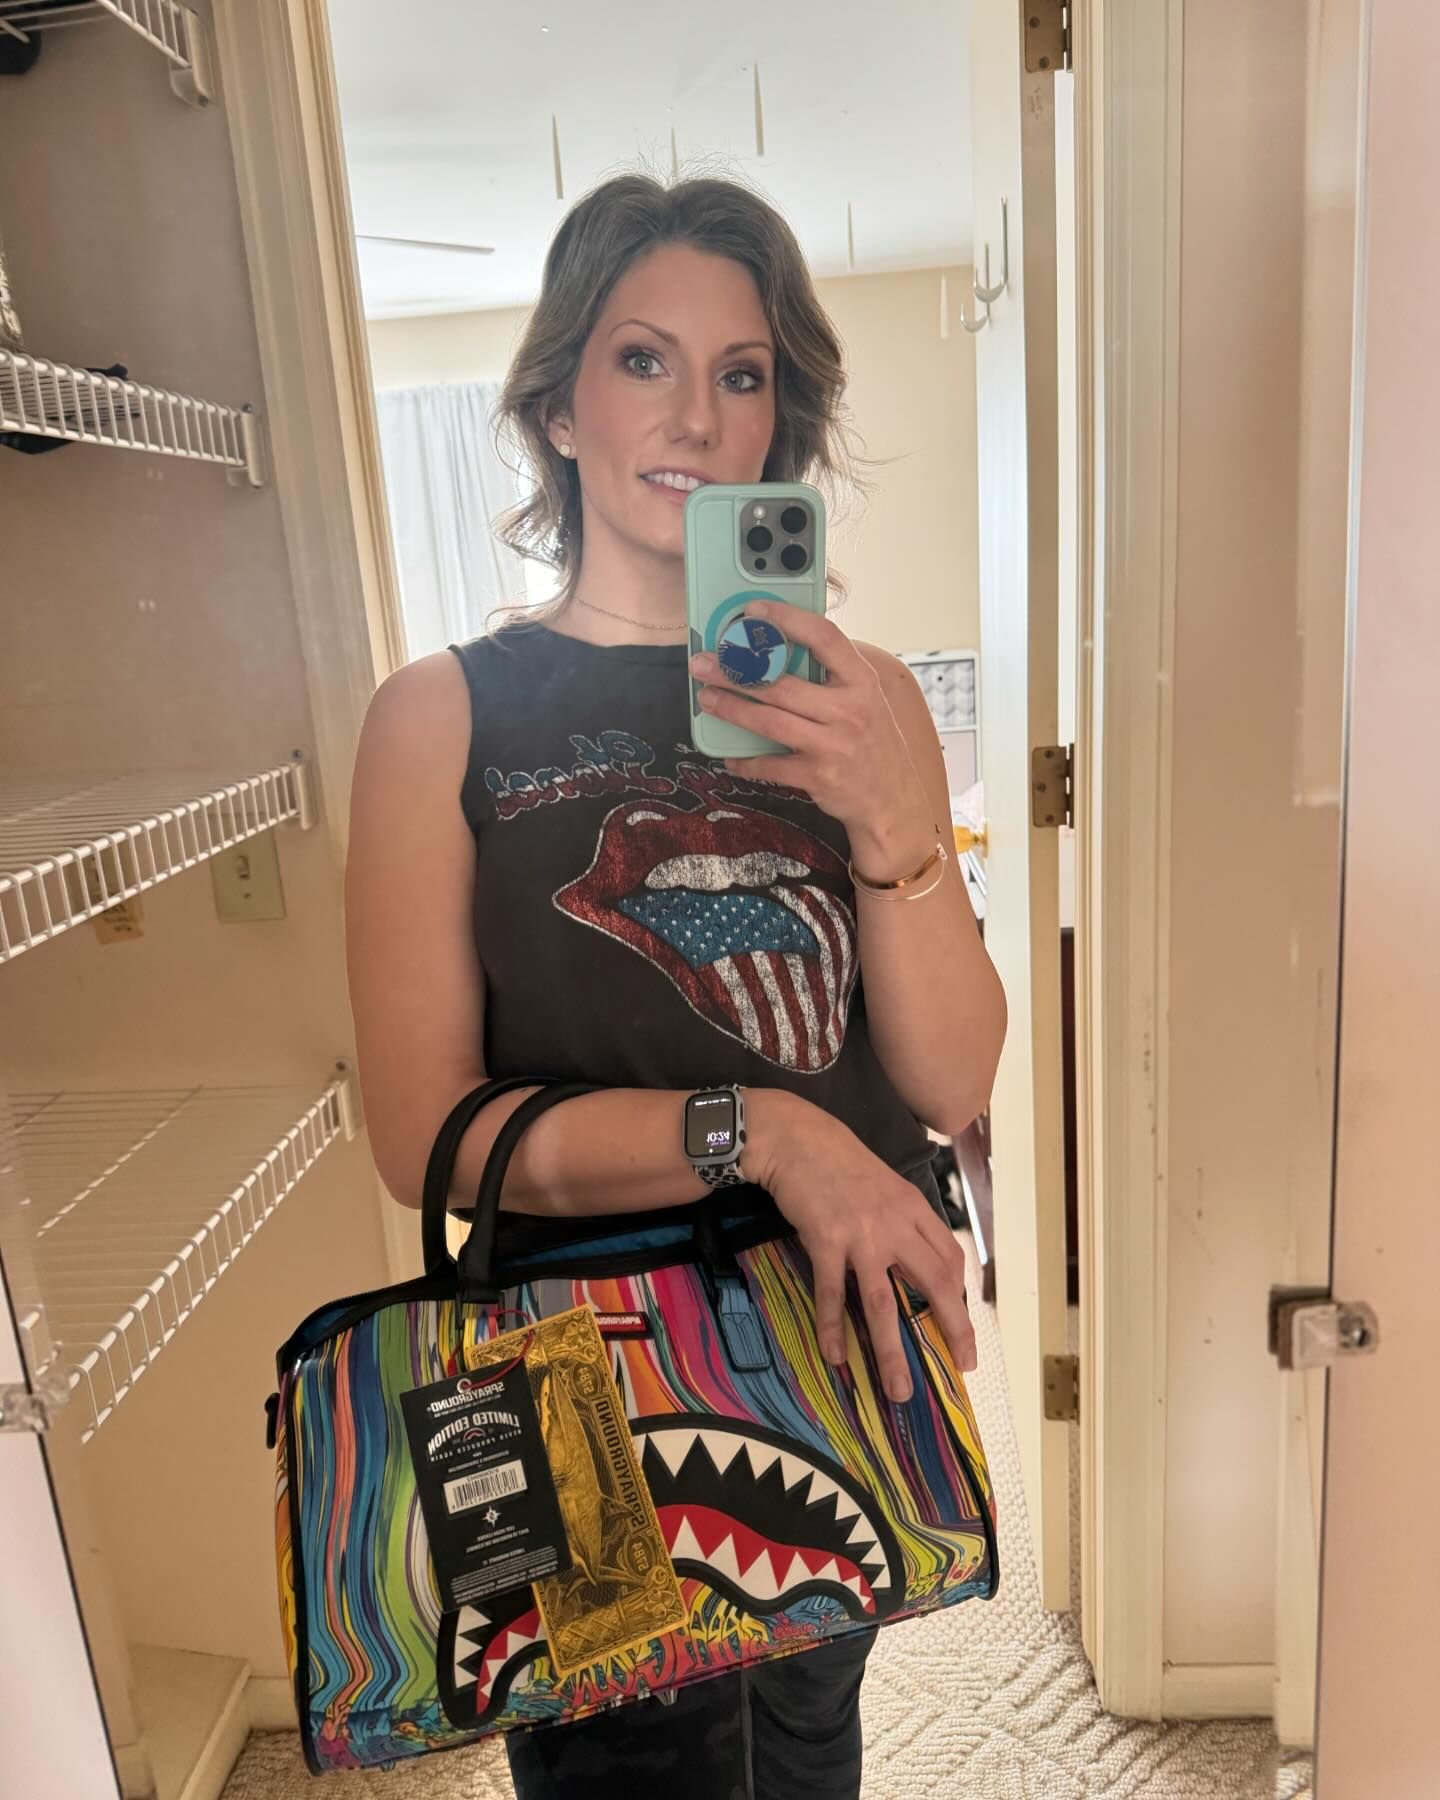 If you’re like me and you need to jet out the door for an event don’t forget your @sprayground super melt mini duffel! And check out this gorgeous print 😘 more coming soon.